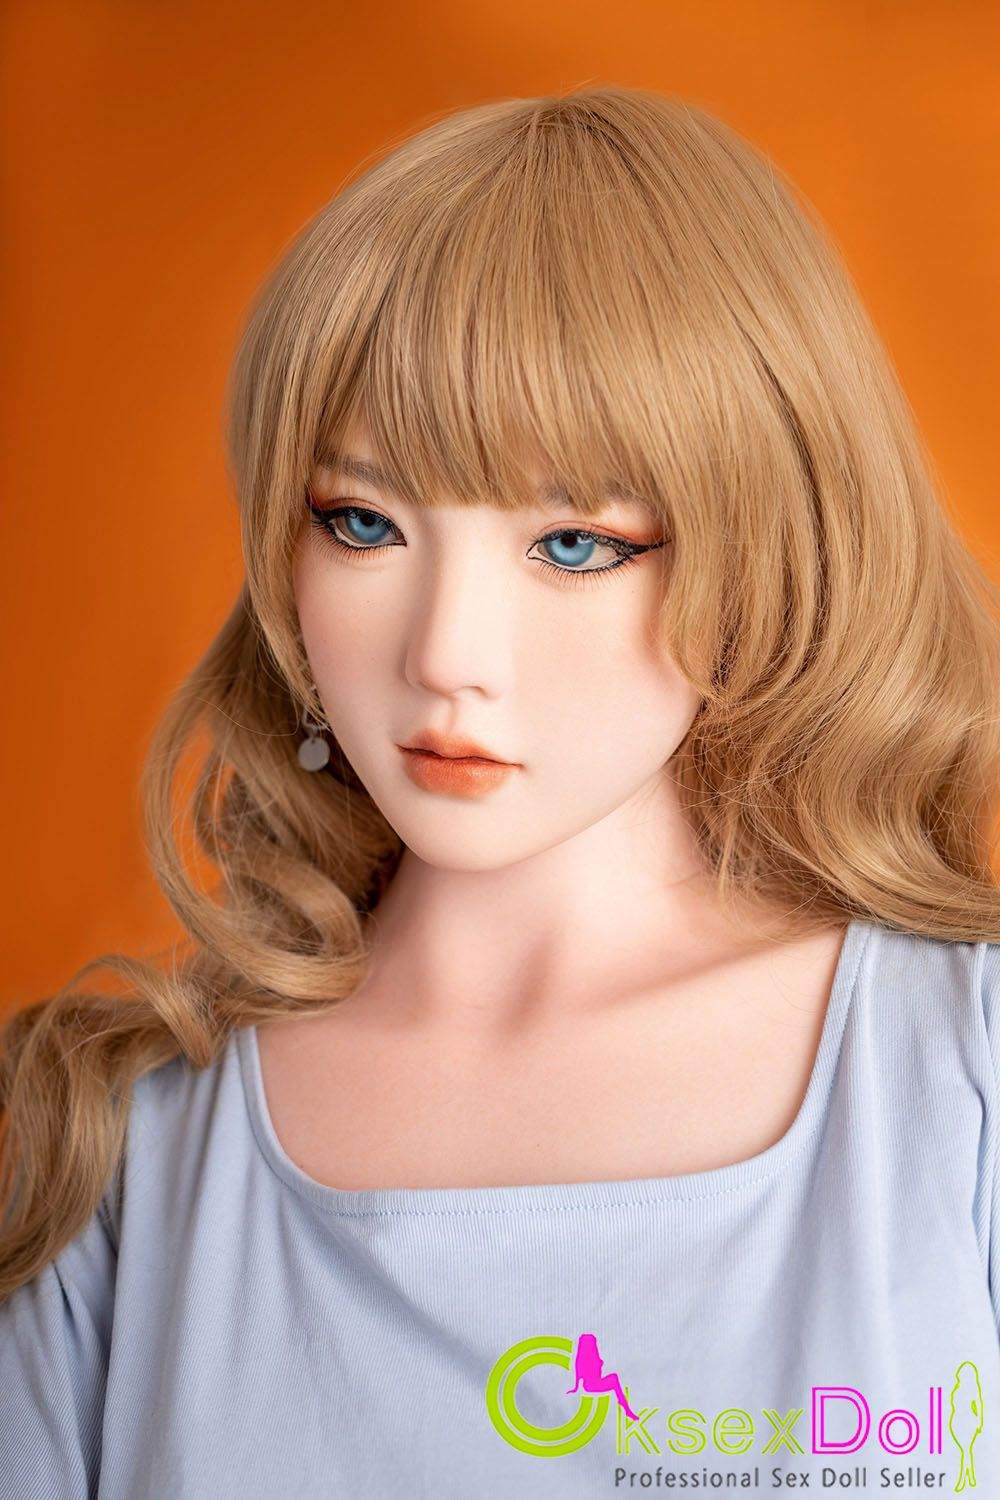 Bezlya C-cup Real Love Dolls Pictures